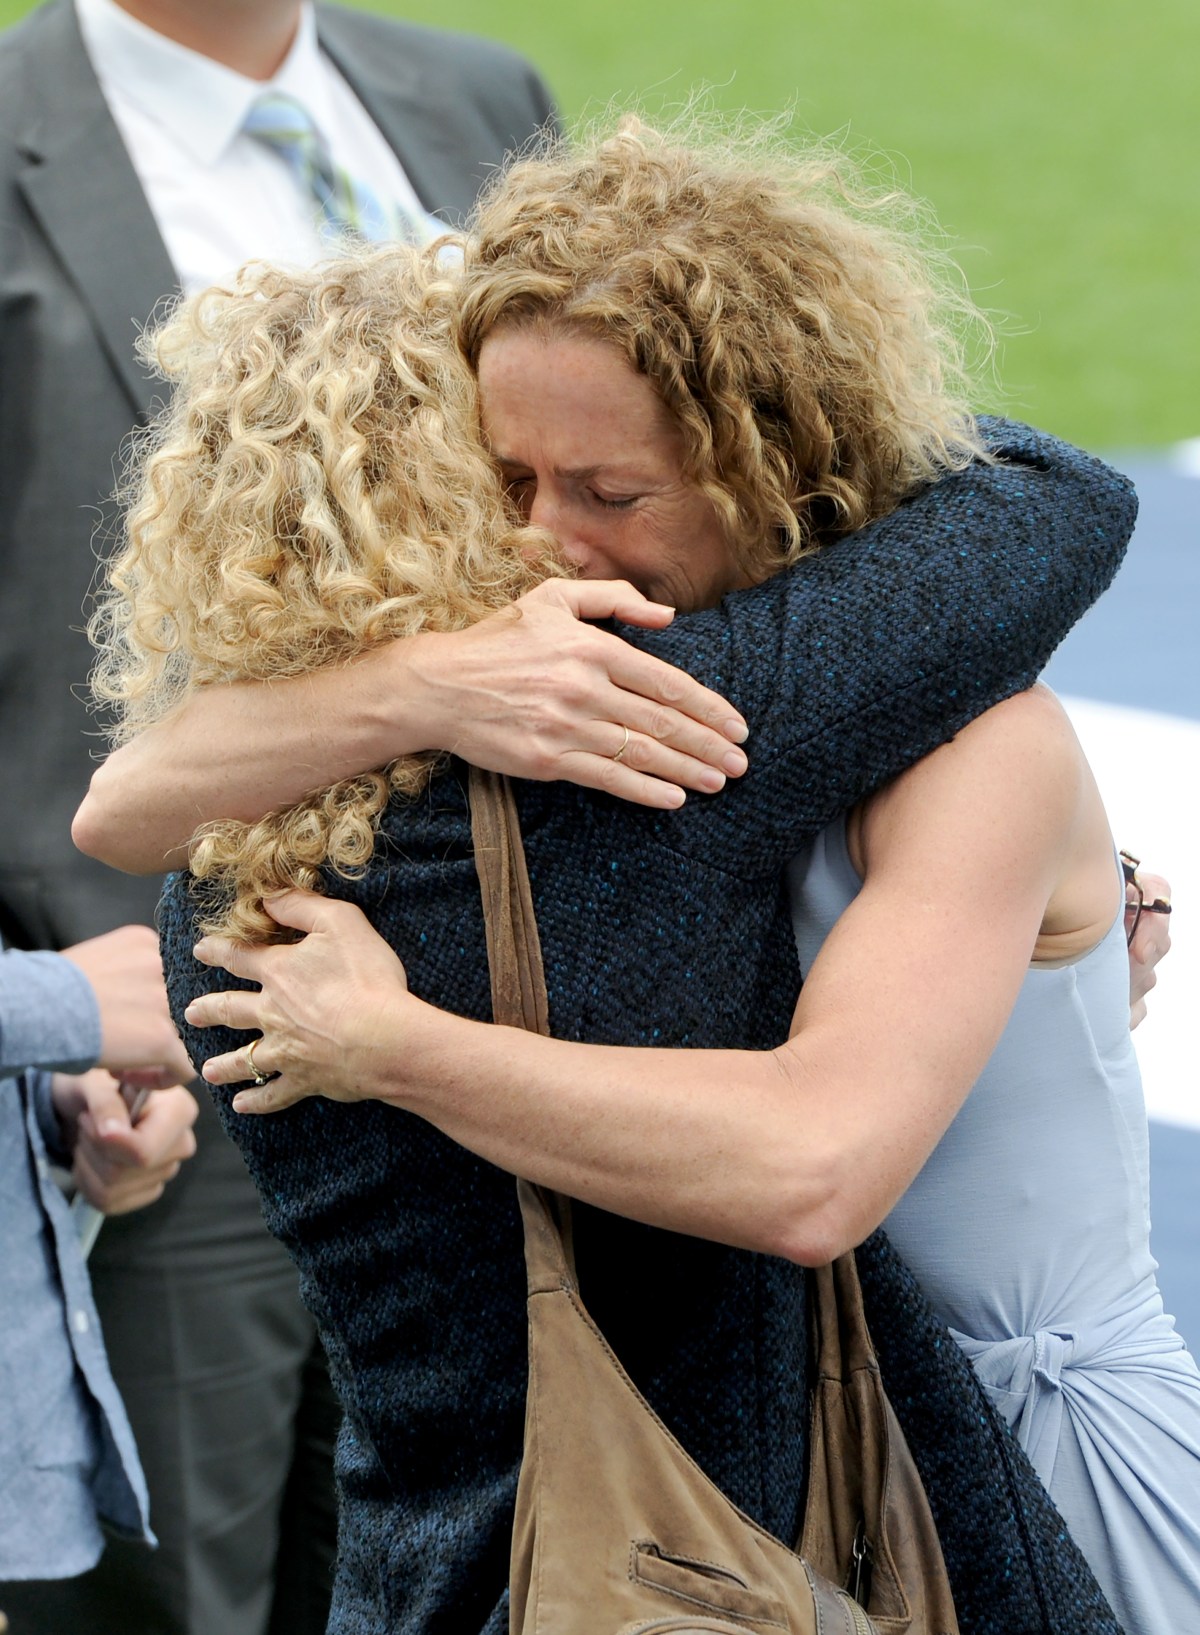 Geraldine Couch (right) is embraced by a friend at a memorial service to celebrate the life of Geelong champion Paul Couch at Simonds Stadium in Geelong, Tuesday, March. 15, 2016. (AAP Image/Mal Fairclough) NO ARCHIVING